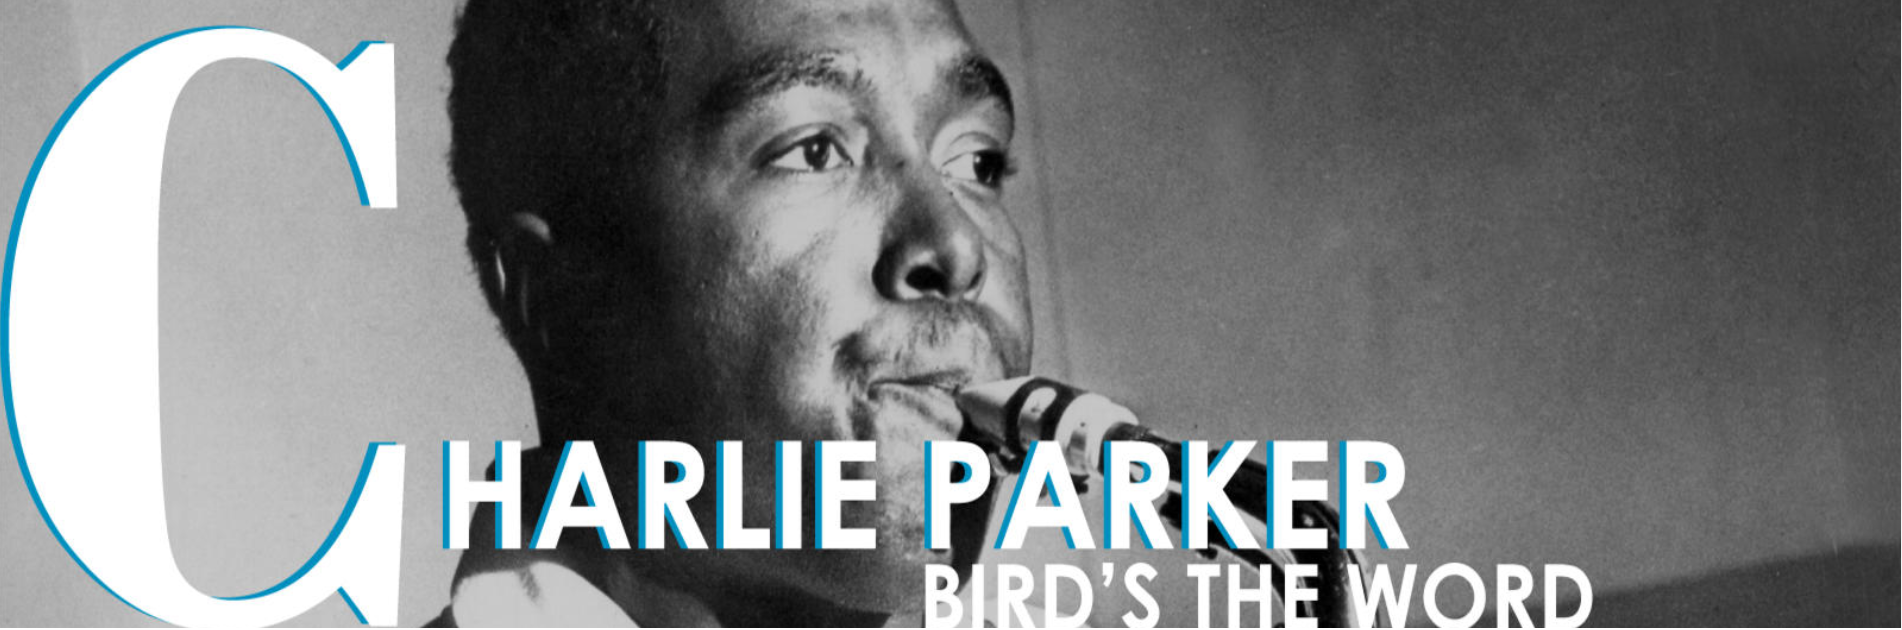 Charlie Parker: Bird’s the Word